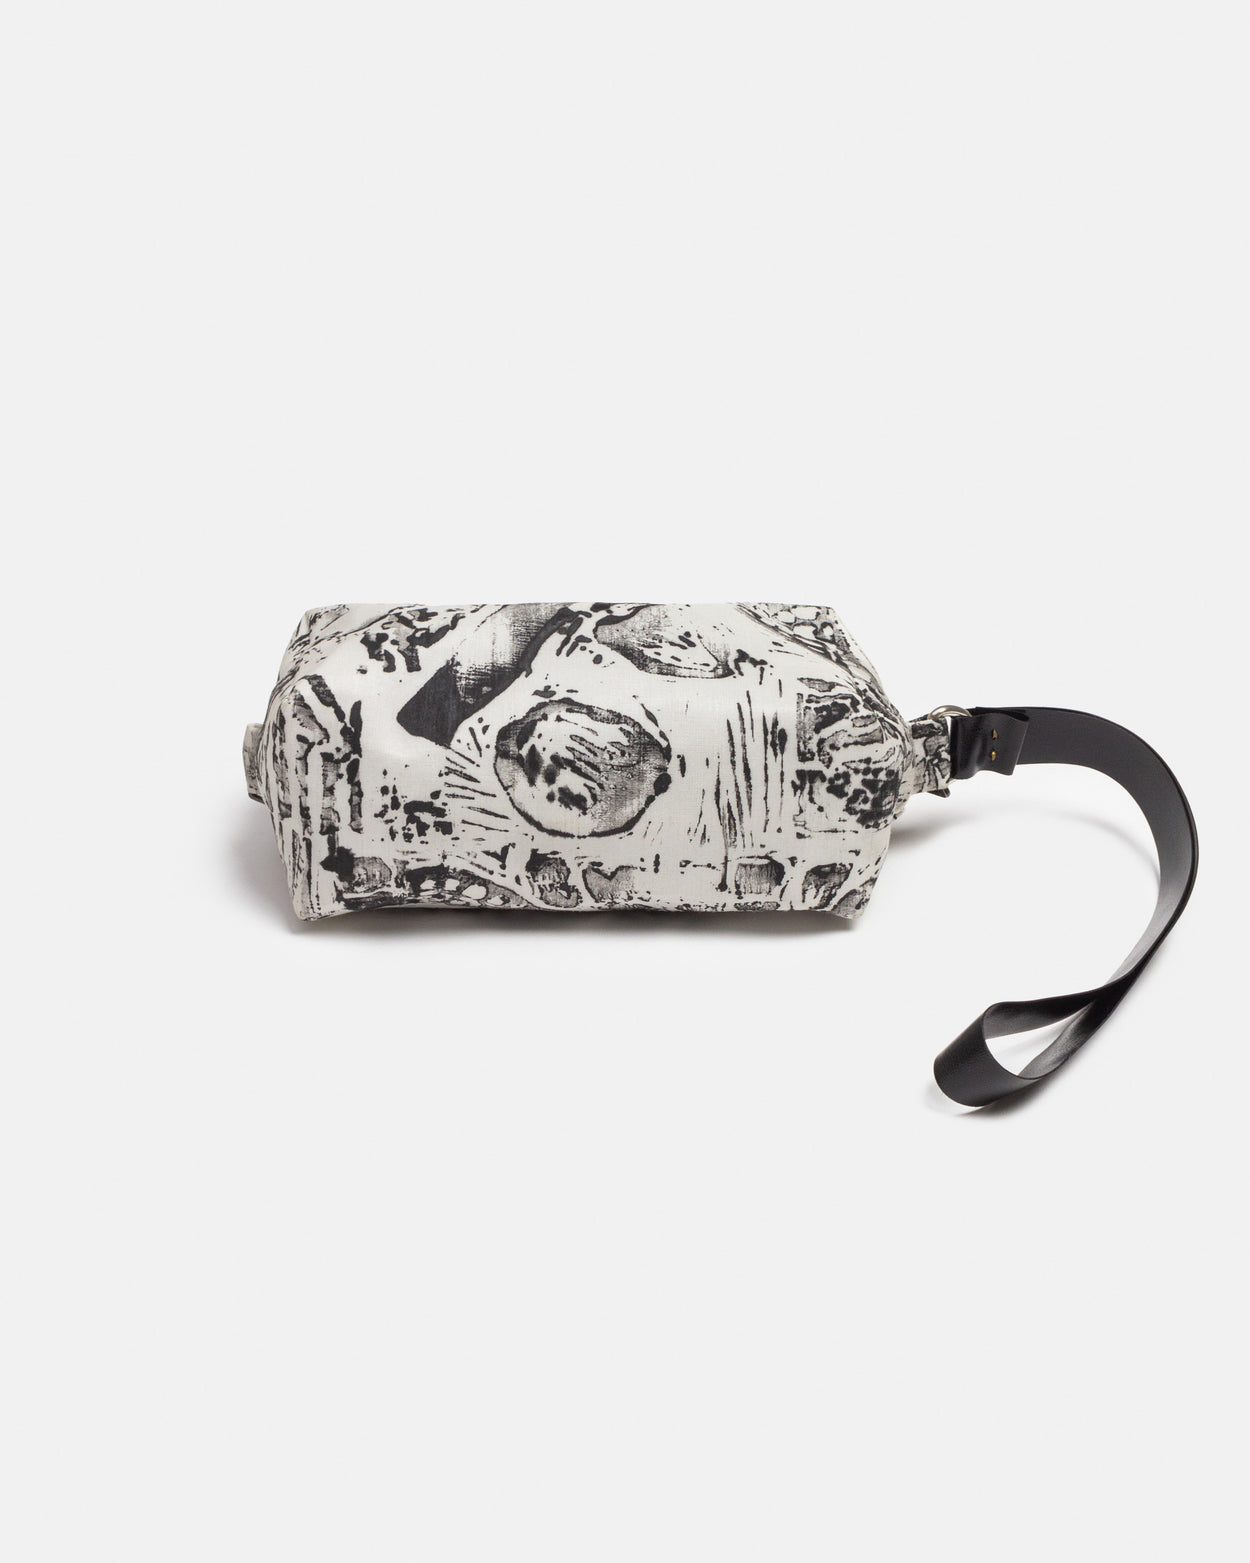 The B&W Block Printed Pouch